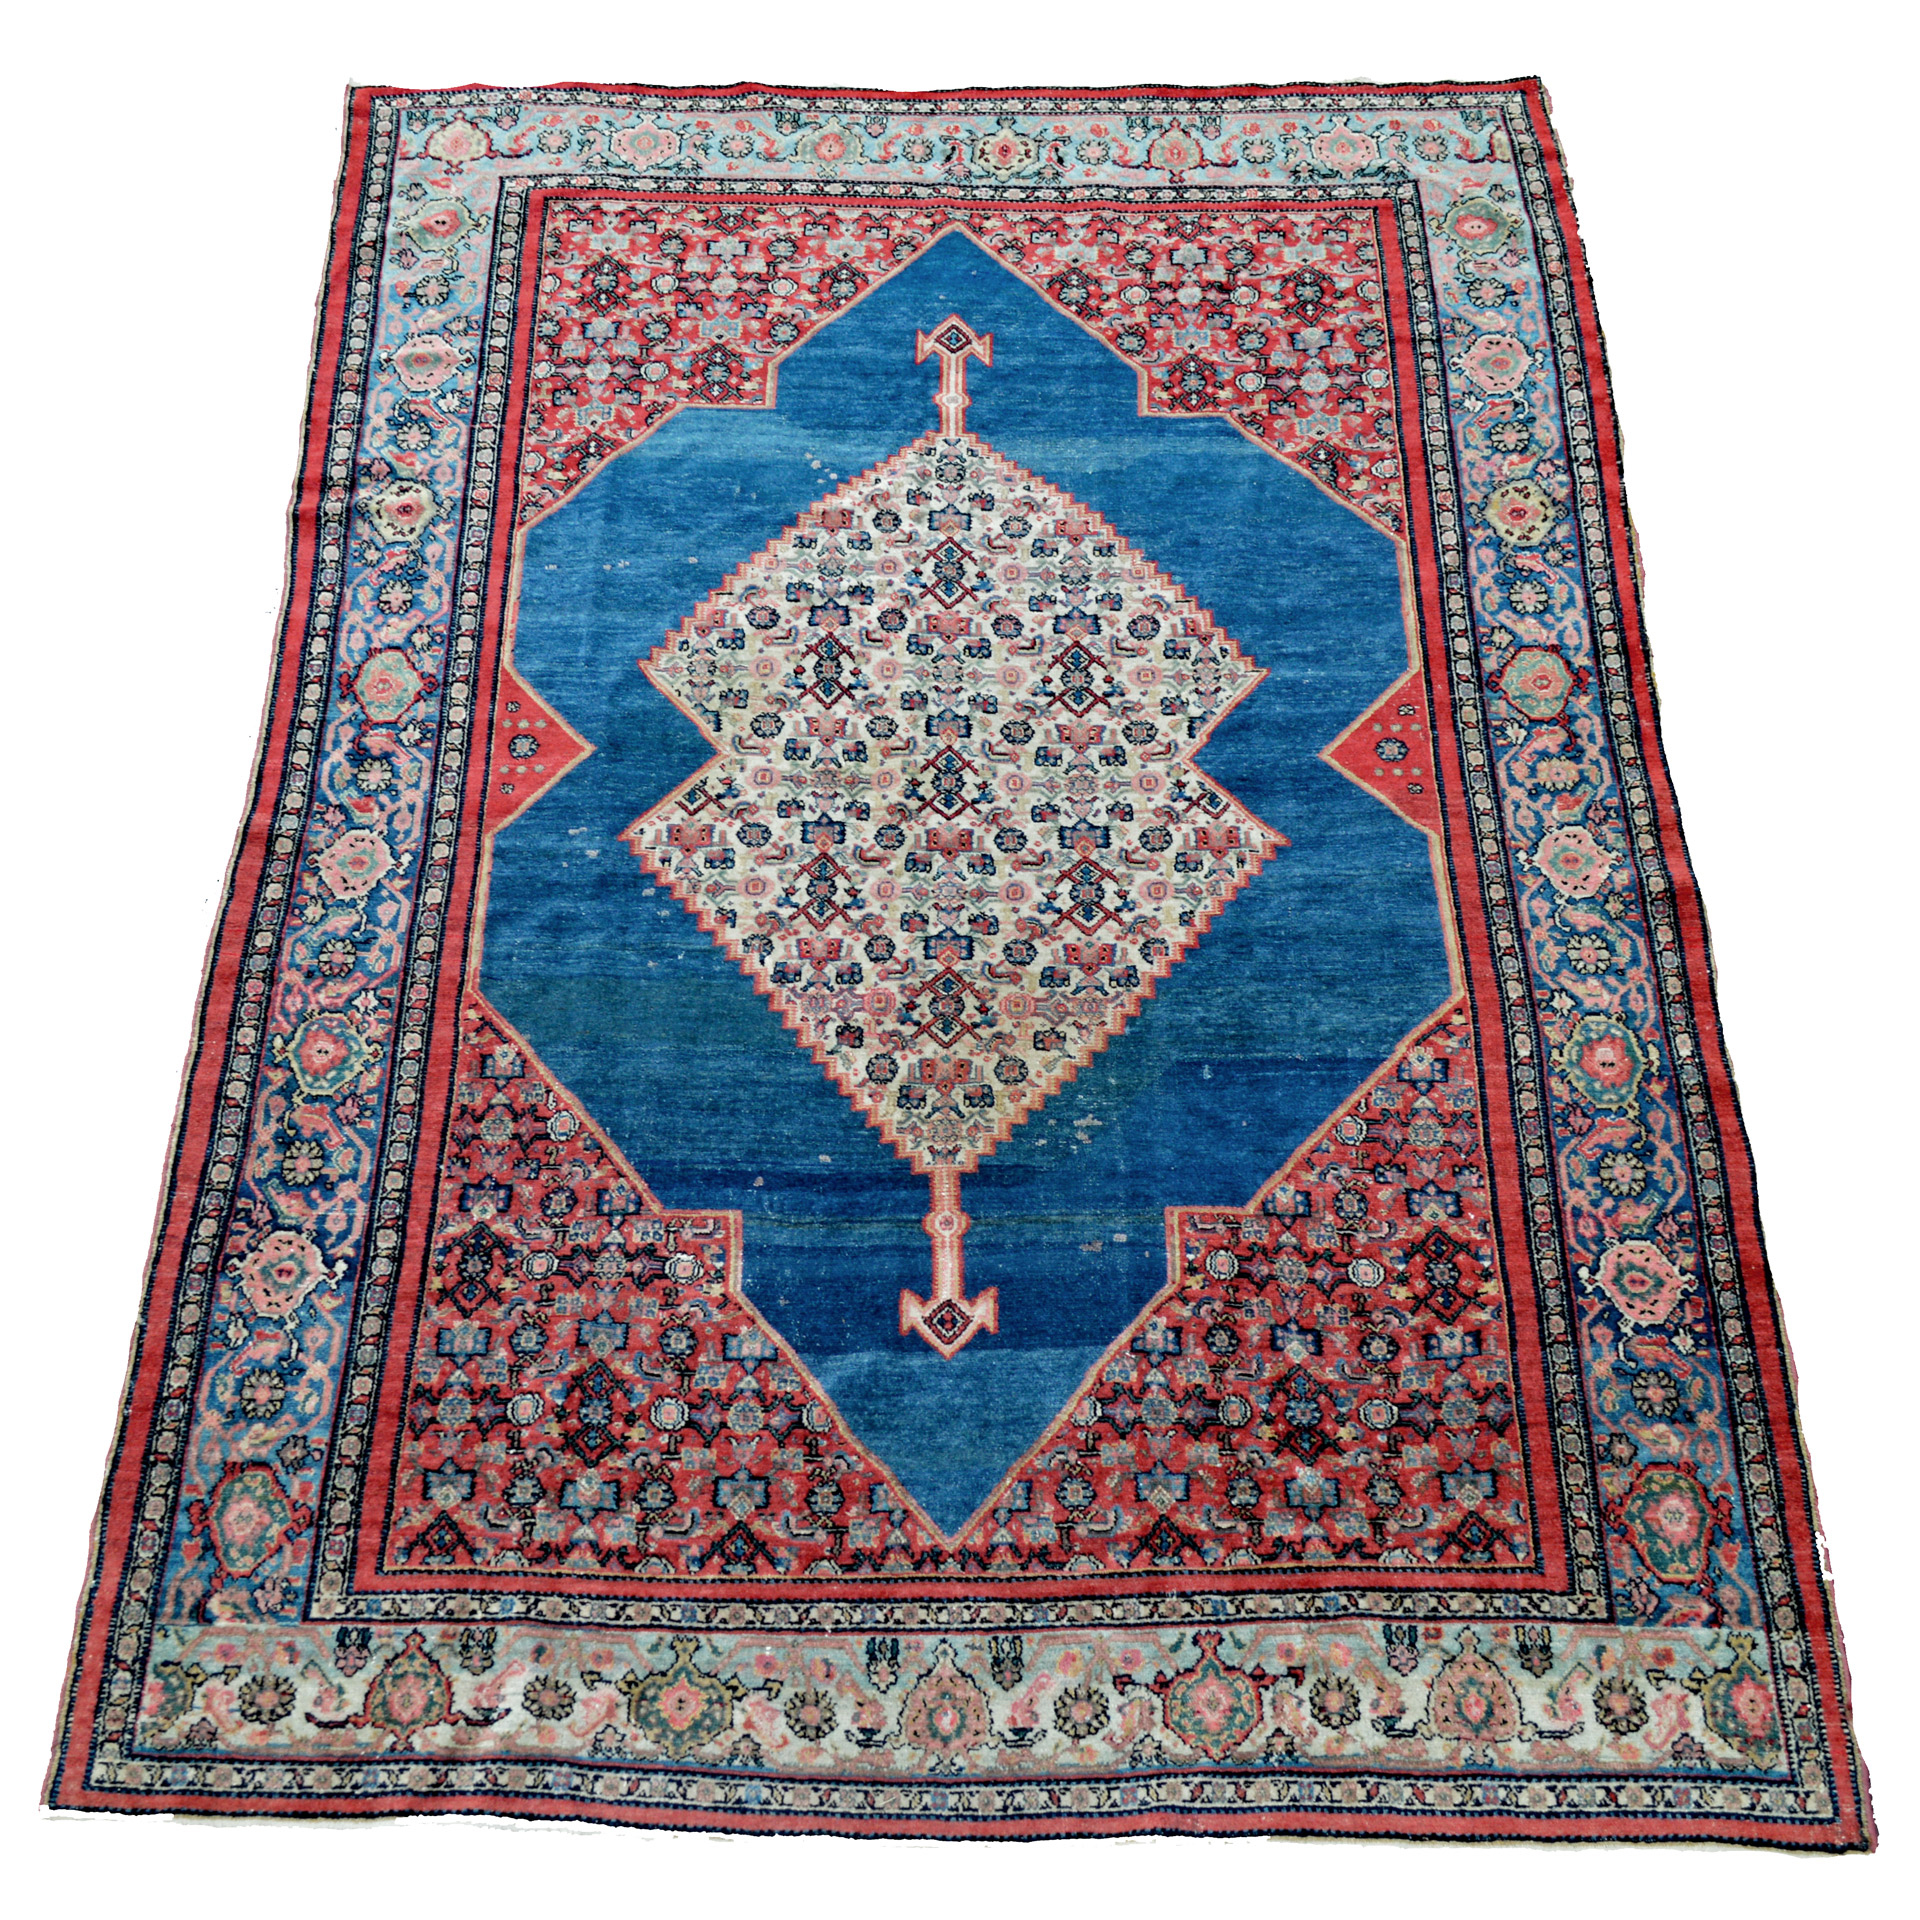 Antique Senneh rug with denim blue open field and ivory medallion, northwest Persia, circa 1890 - Douglas Stock Gallery, antique Persian rugs, South Natick, Boston,MA area, antique rugs New England